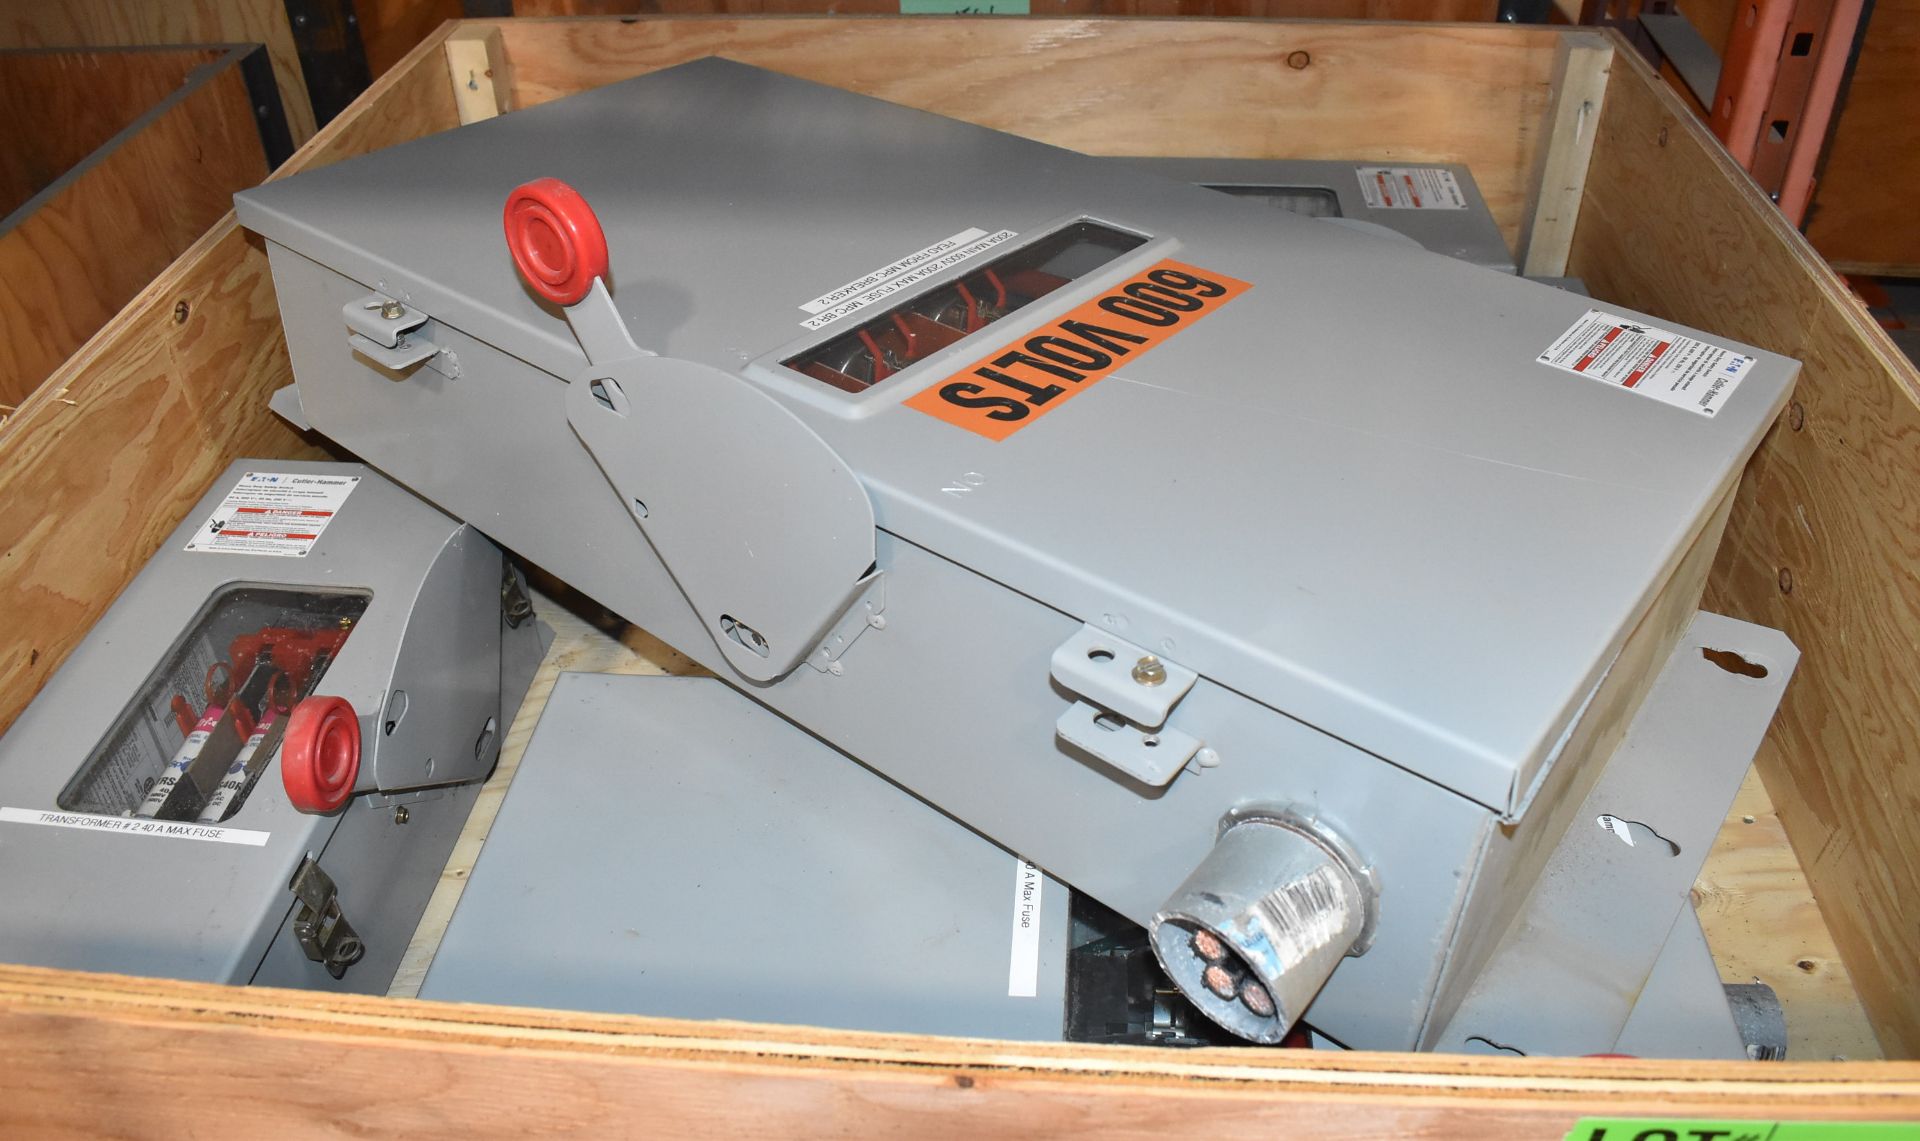 LOT/ CRATE OF EATON CUTTLER-HAMMER ELECTRICAL DISCONNECT BOXES (CMD WAREHOUSE - 10070301) - Image 2 of 3